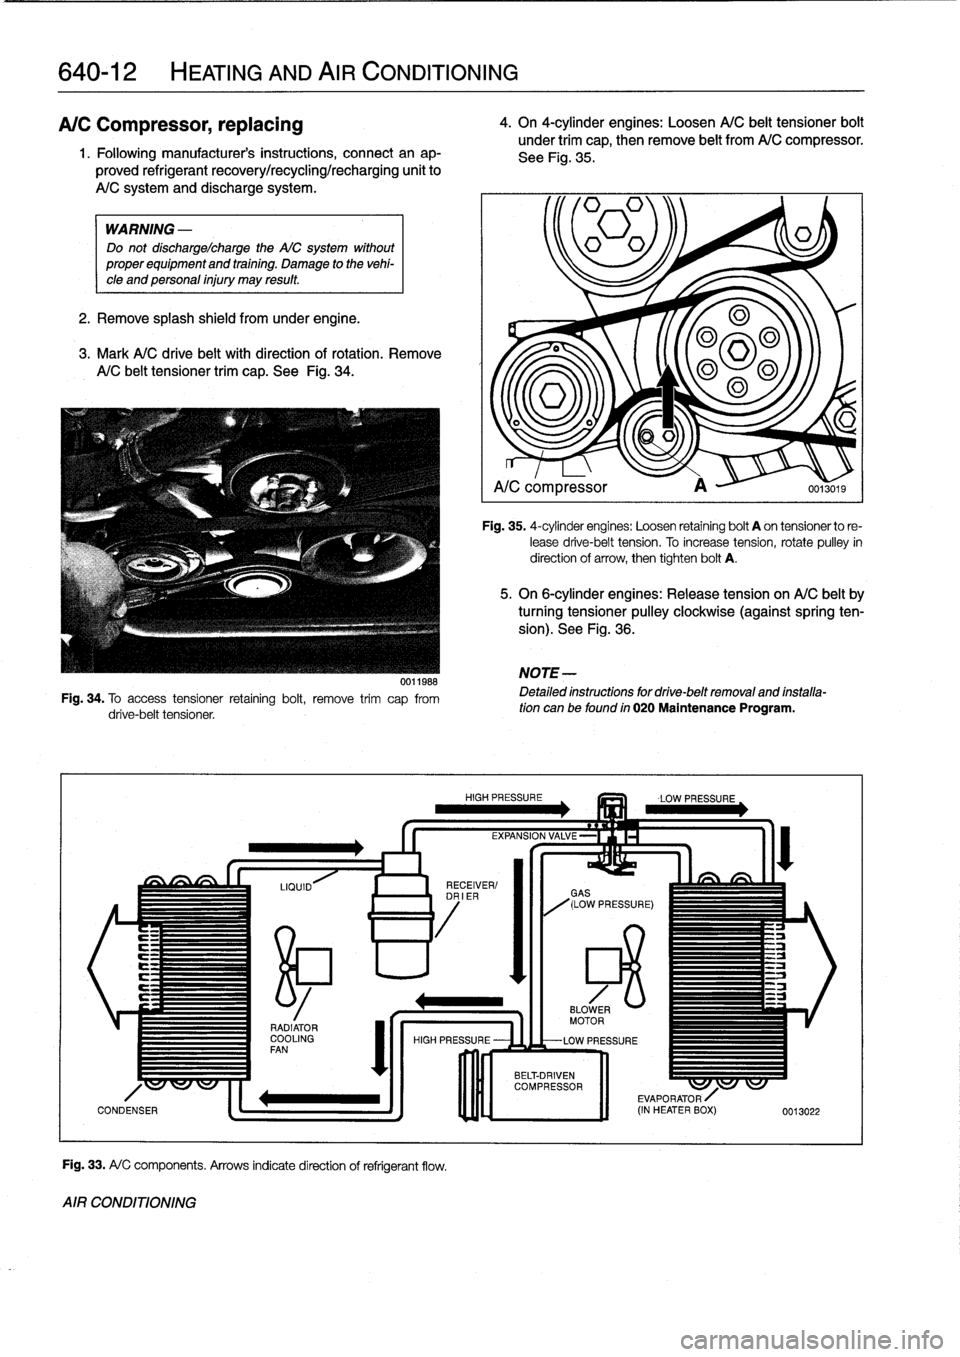 BMW 323i 1993 E36 Owners Manual 
640-12

	

HEATING
AND
AIR
CONDITIONING

A/C
Compressor,
replacing

1
.
Followingmanufacturers
instructions,
connectanap-

proved
refrigerant
recovery/recycling/recharging
unit
to

A/C
system
and
di